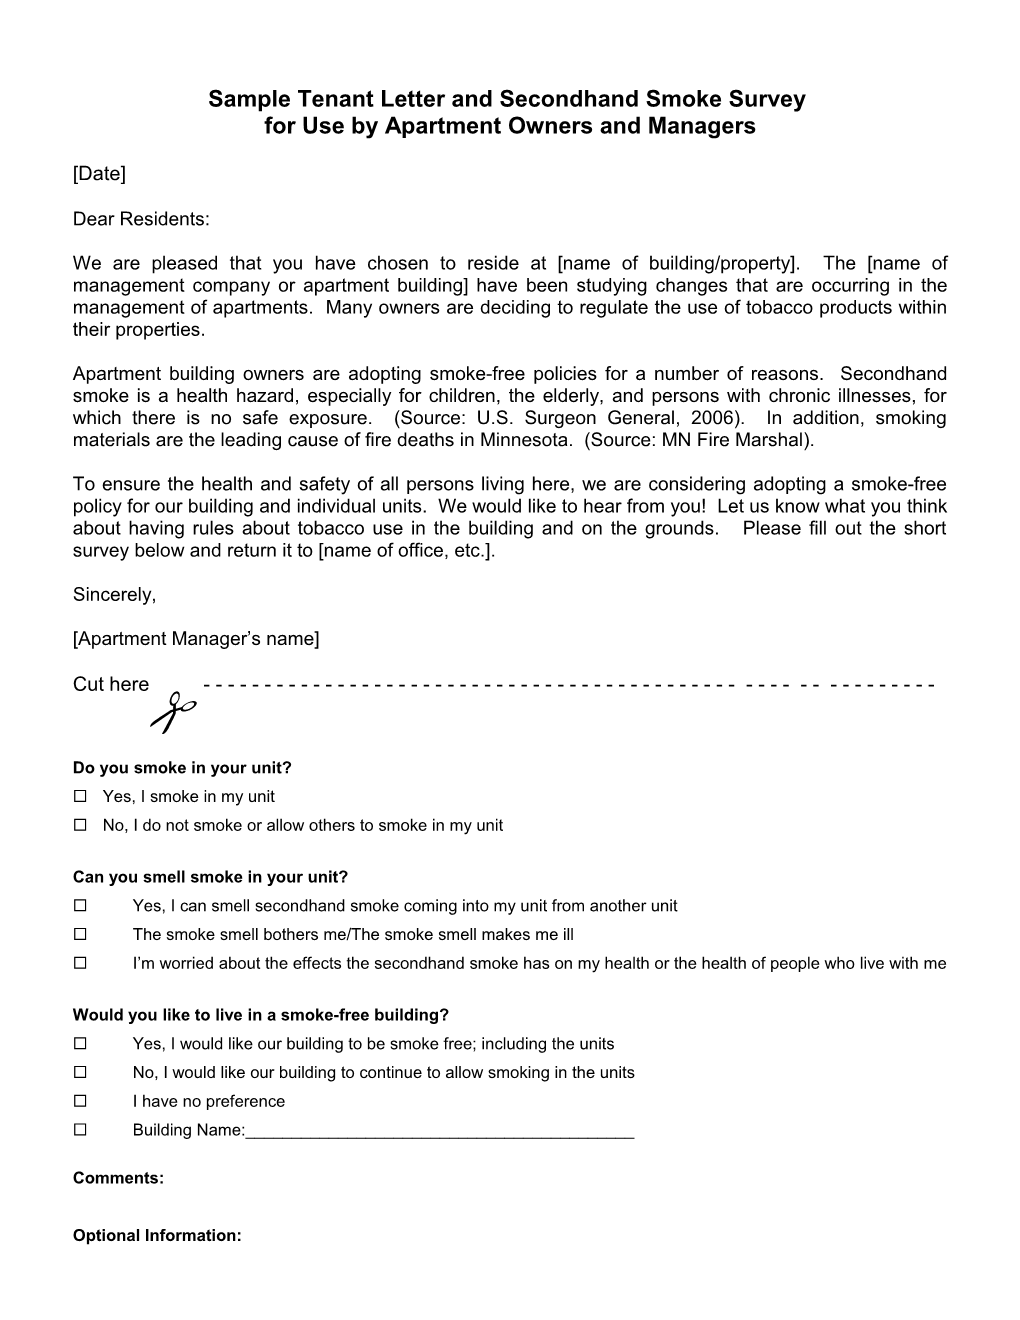 Sample Tenant Letter and Survey for Owners/Managers